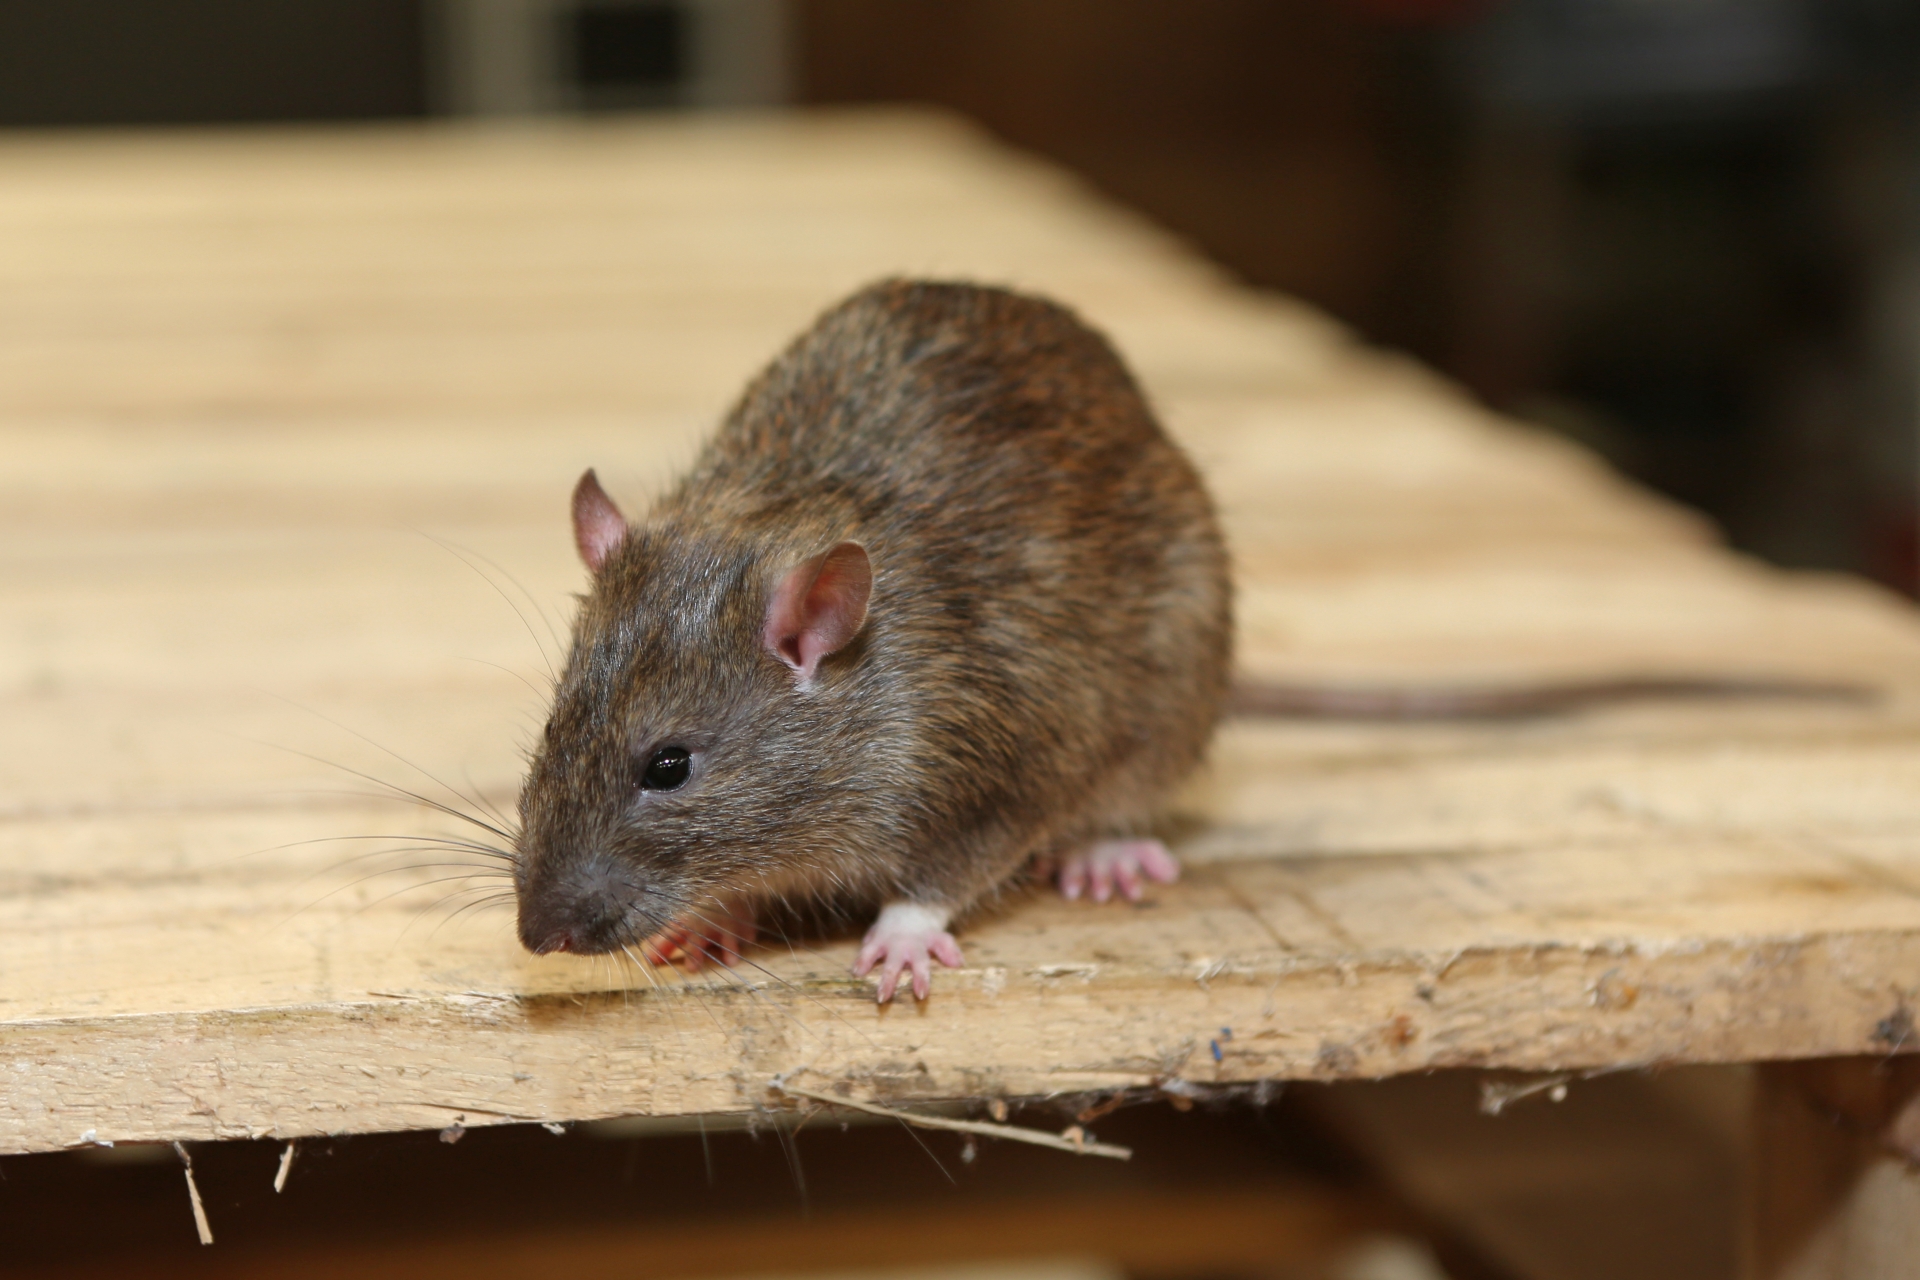 Rat Control, Pest Control in Orpington, Chelsfield, Downe, BR6. Call Now 020 8166 9746